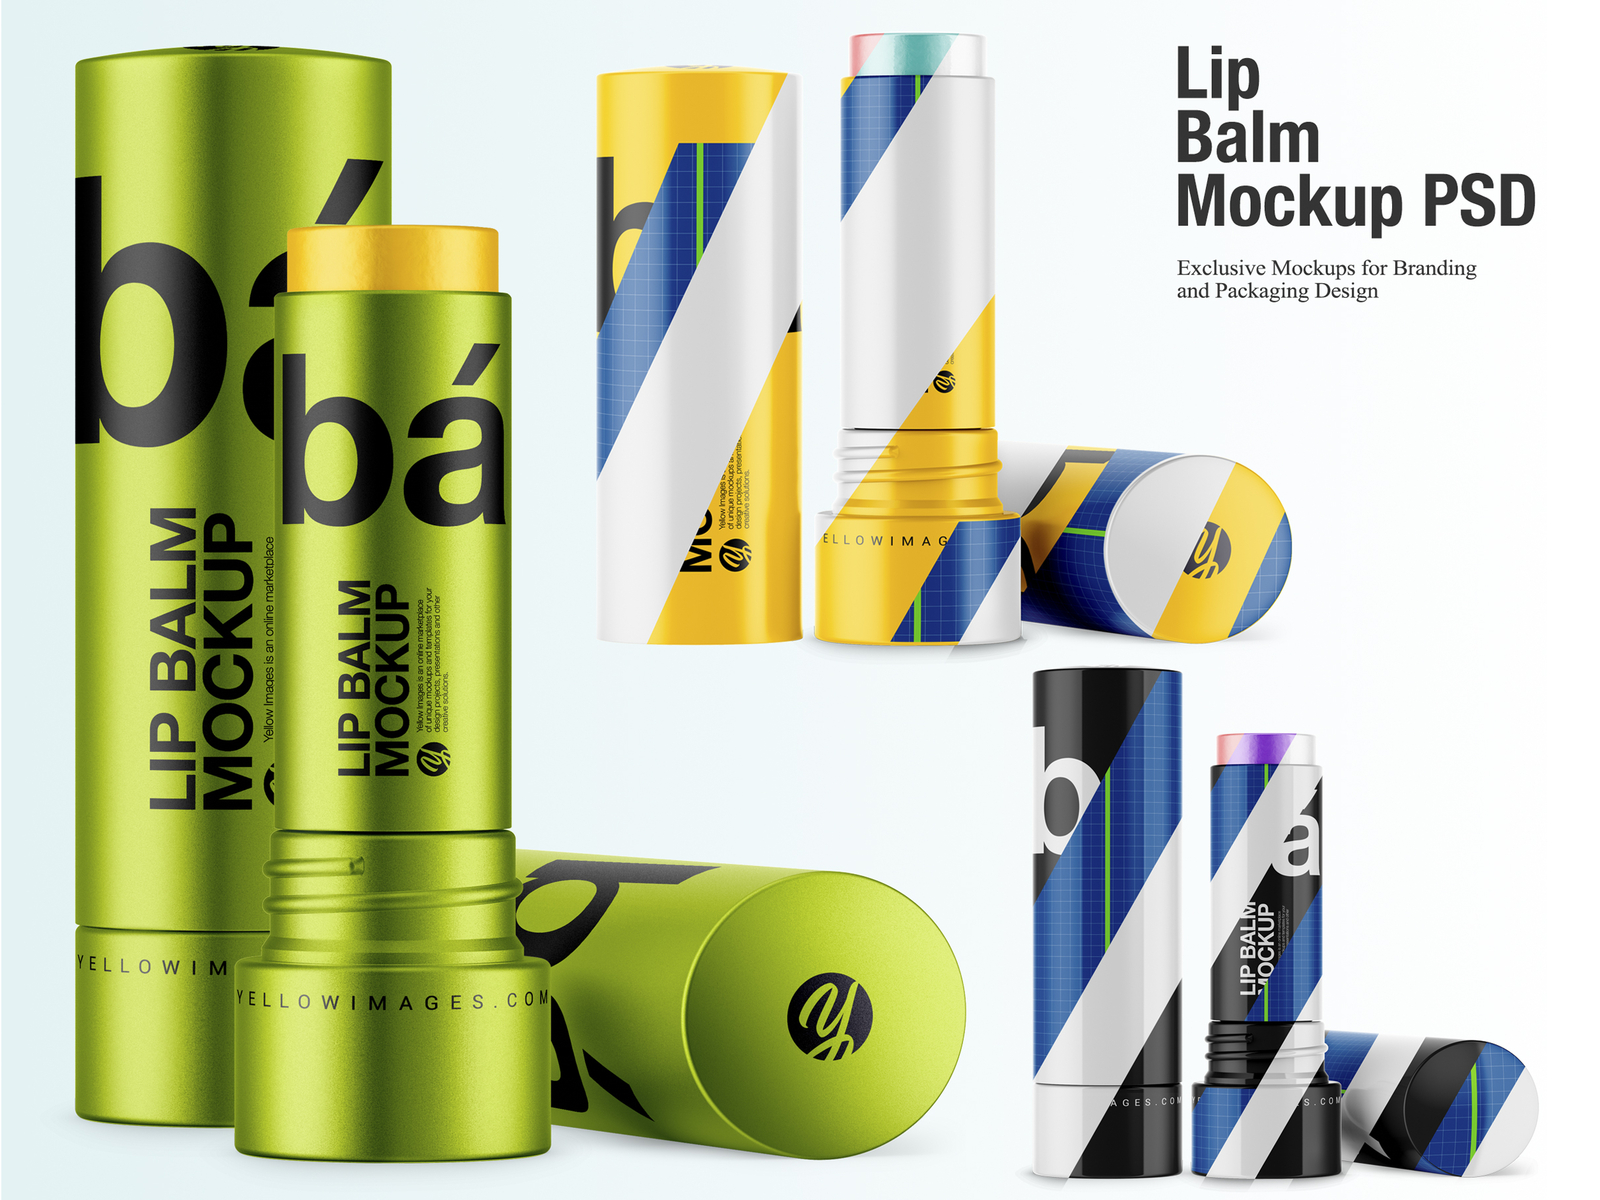 Download Glossy, Matte and Metallized Lip Balm Mockup by Oleksandr Hlubokyi on Dribbble